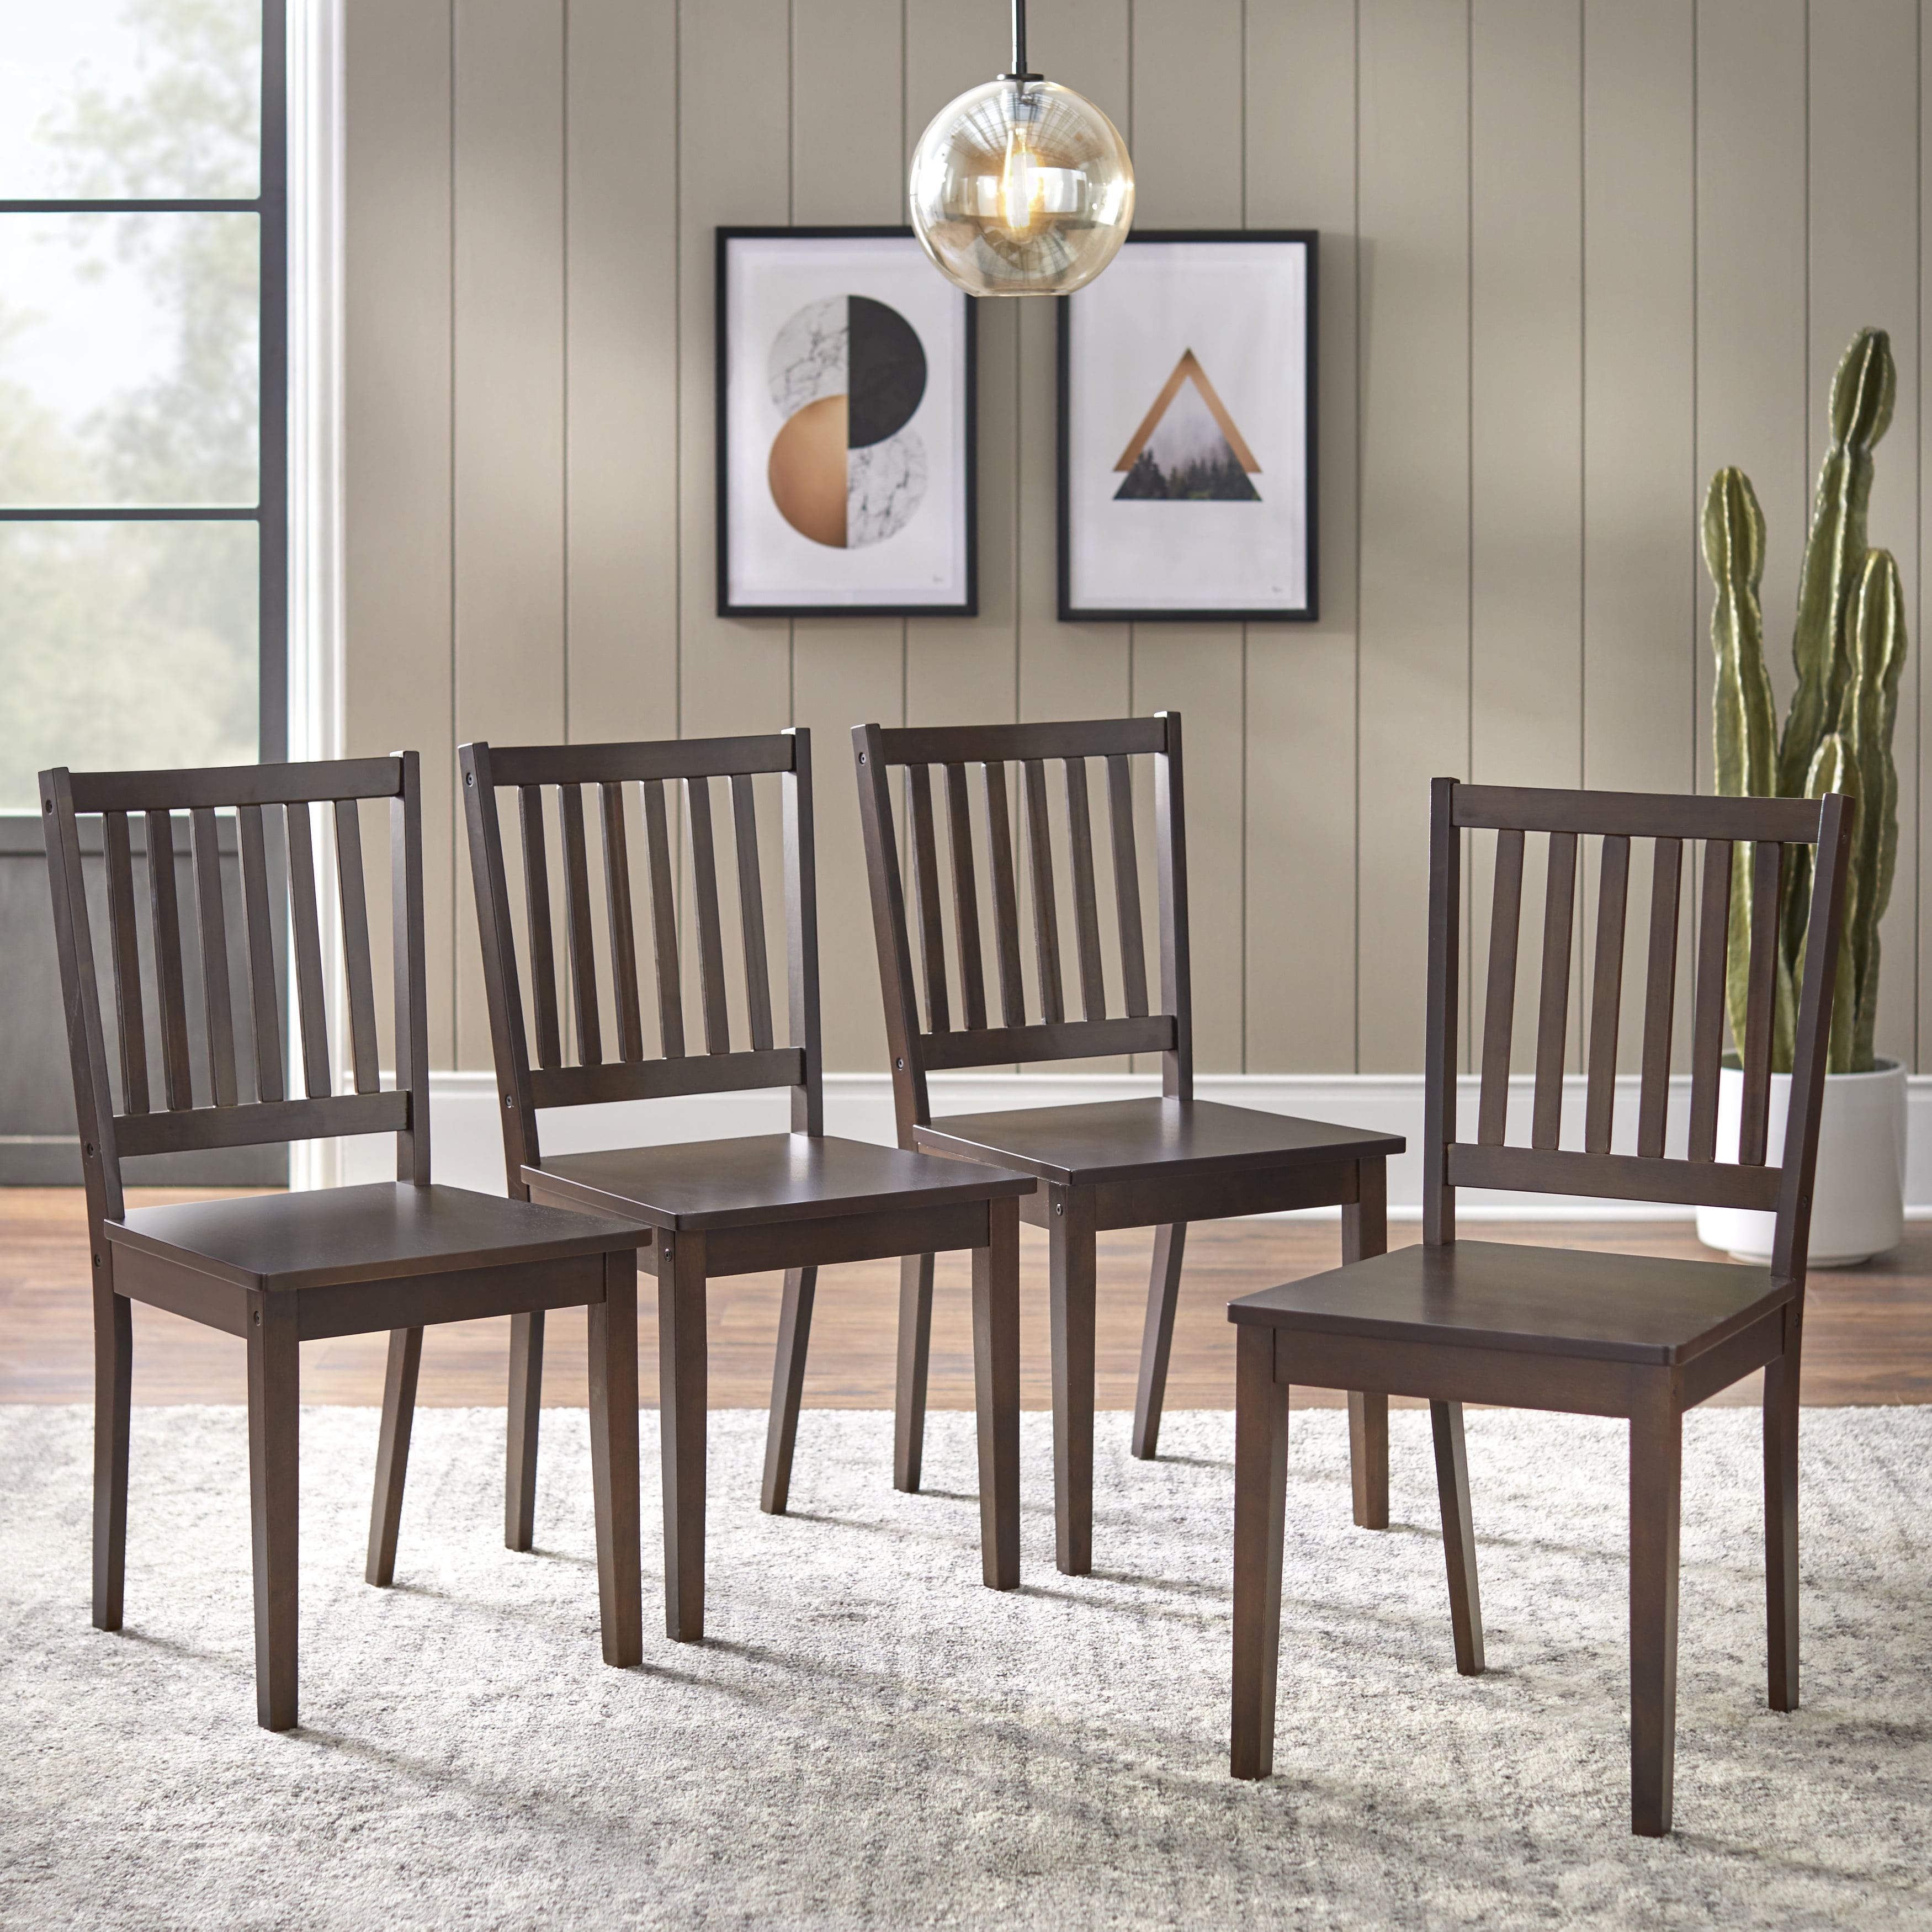 Dining Chairs Set Of 4 Top Sellers, 55% OFF | www.ingeniovirtual.com